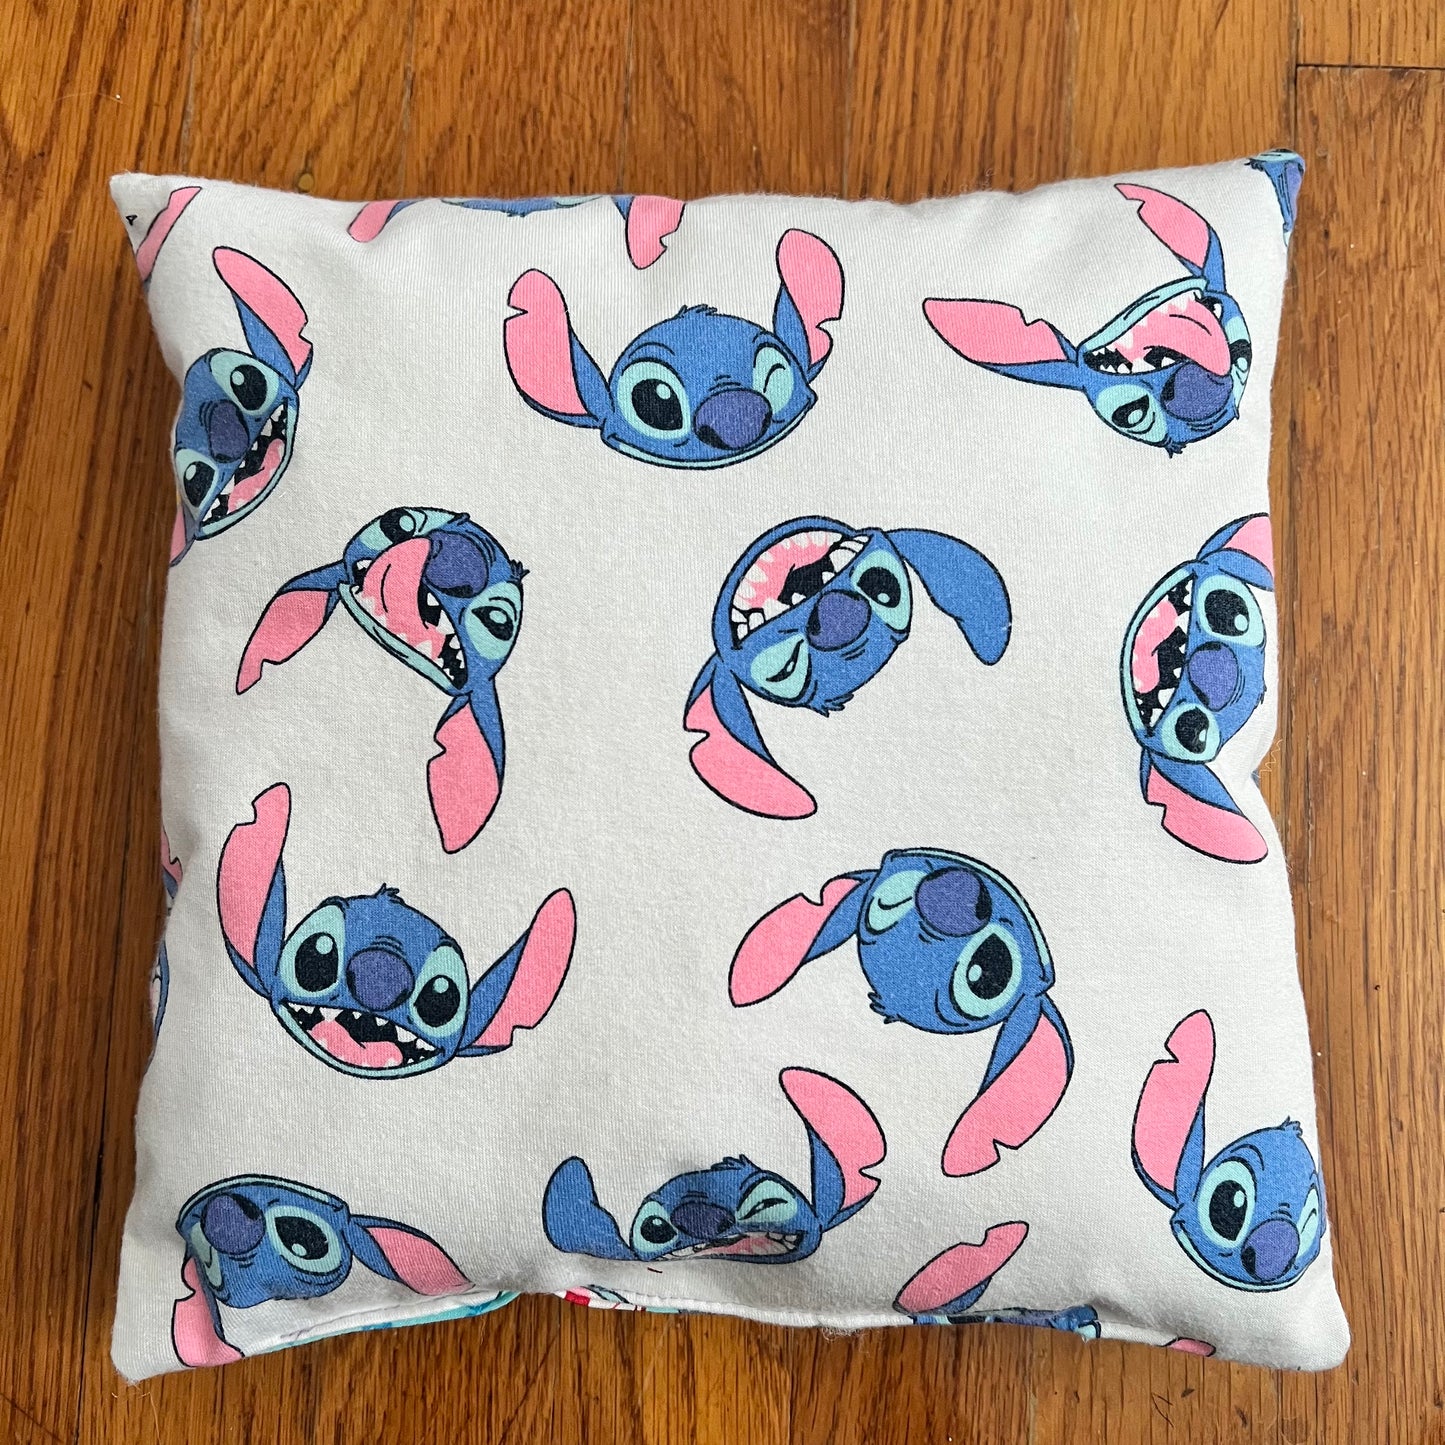 A tooth fairy pillow featuring very cute stitch design aerial view against a wood background